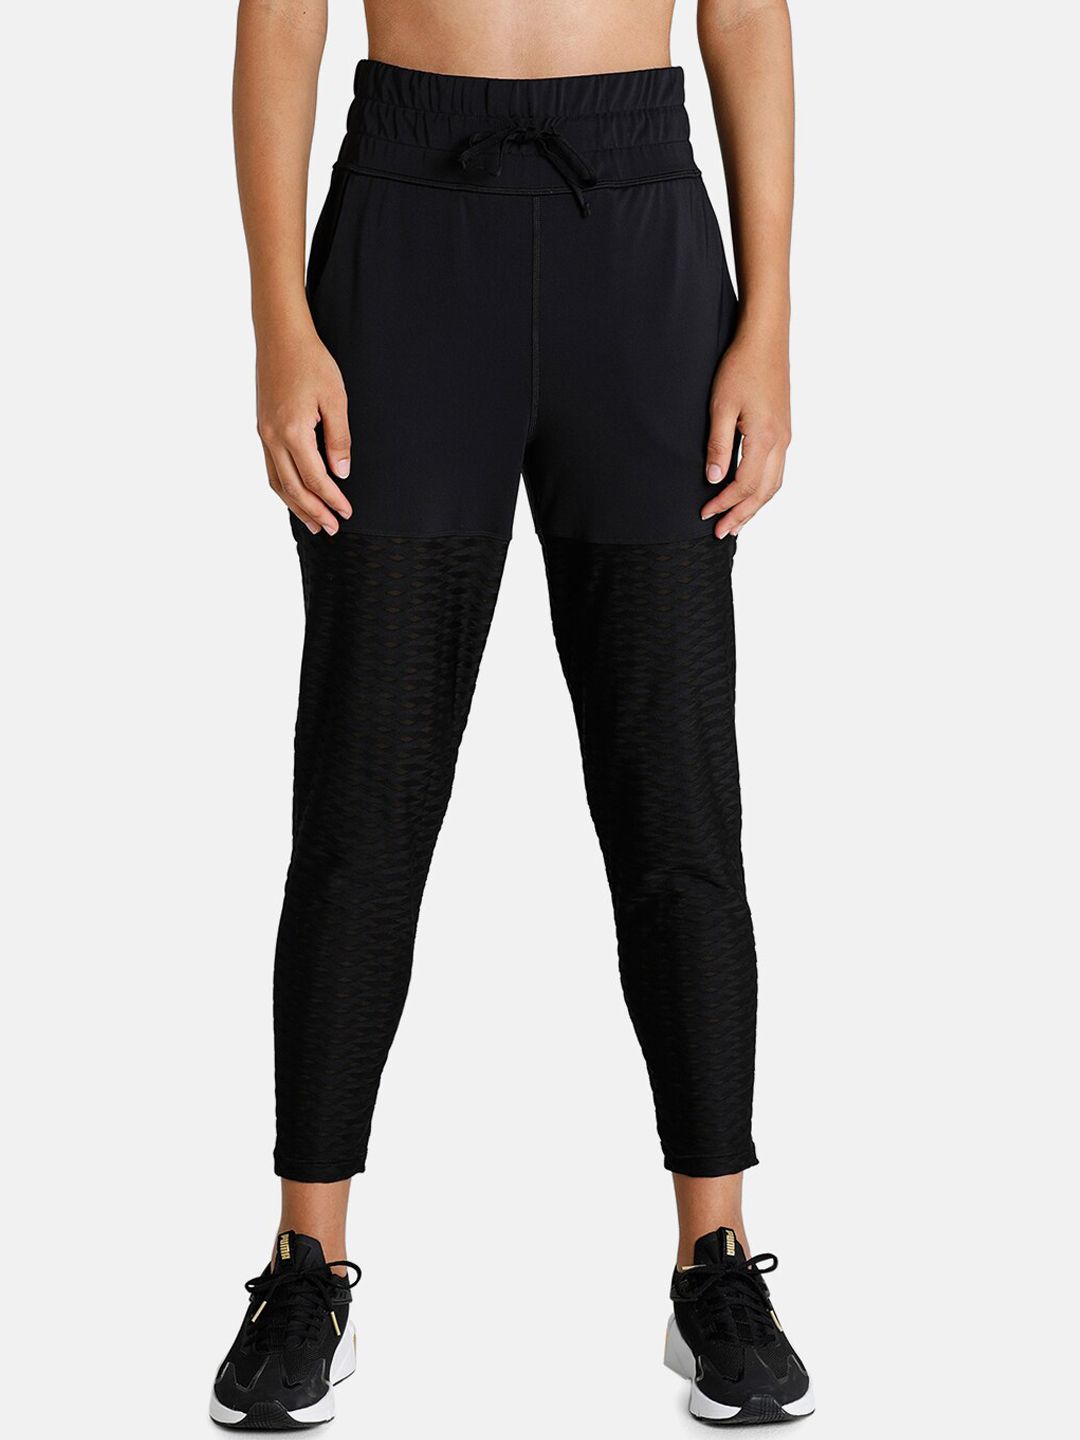 Puma Women Black Flawless Fitted Slim Training Joggers Price in India